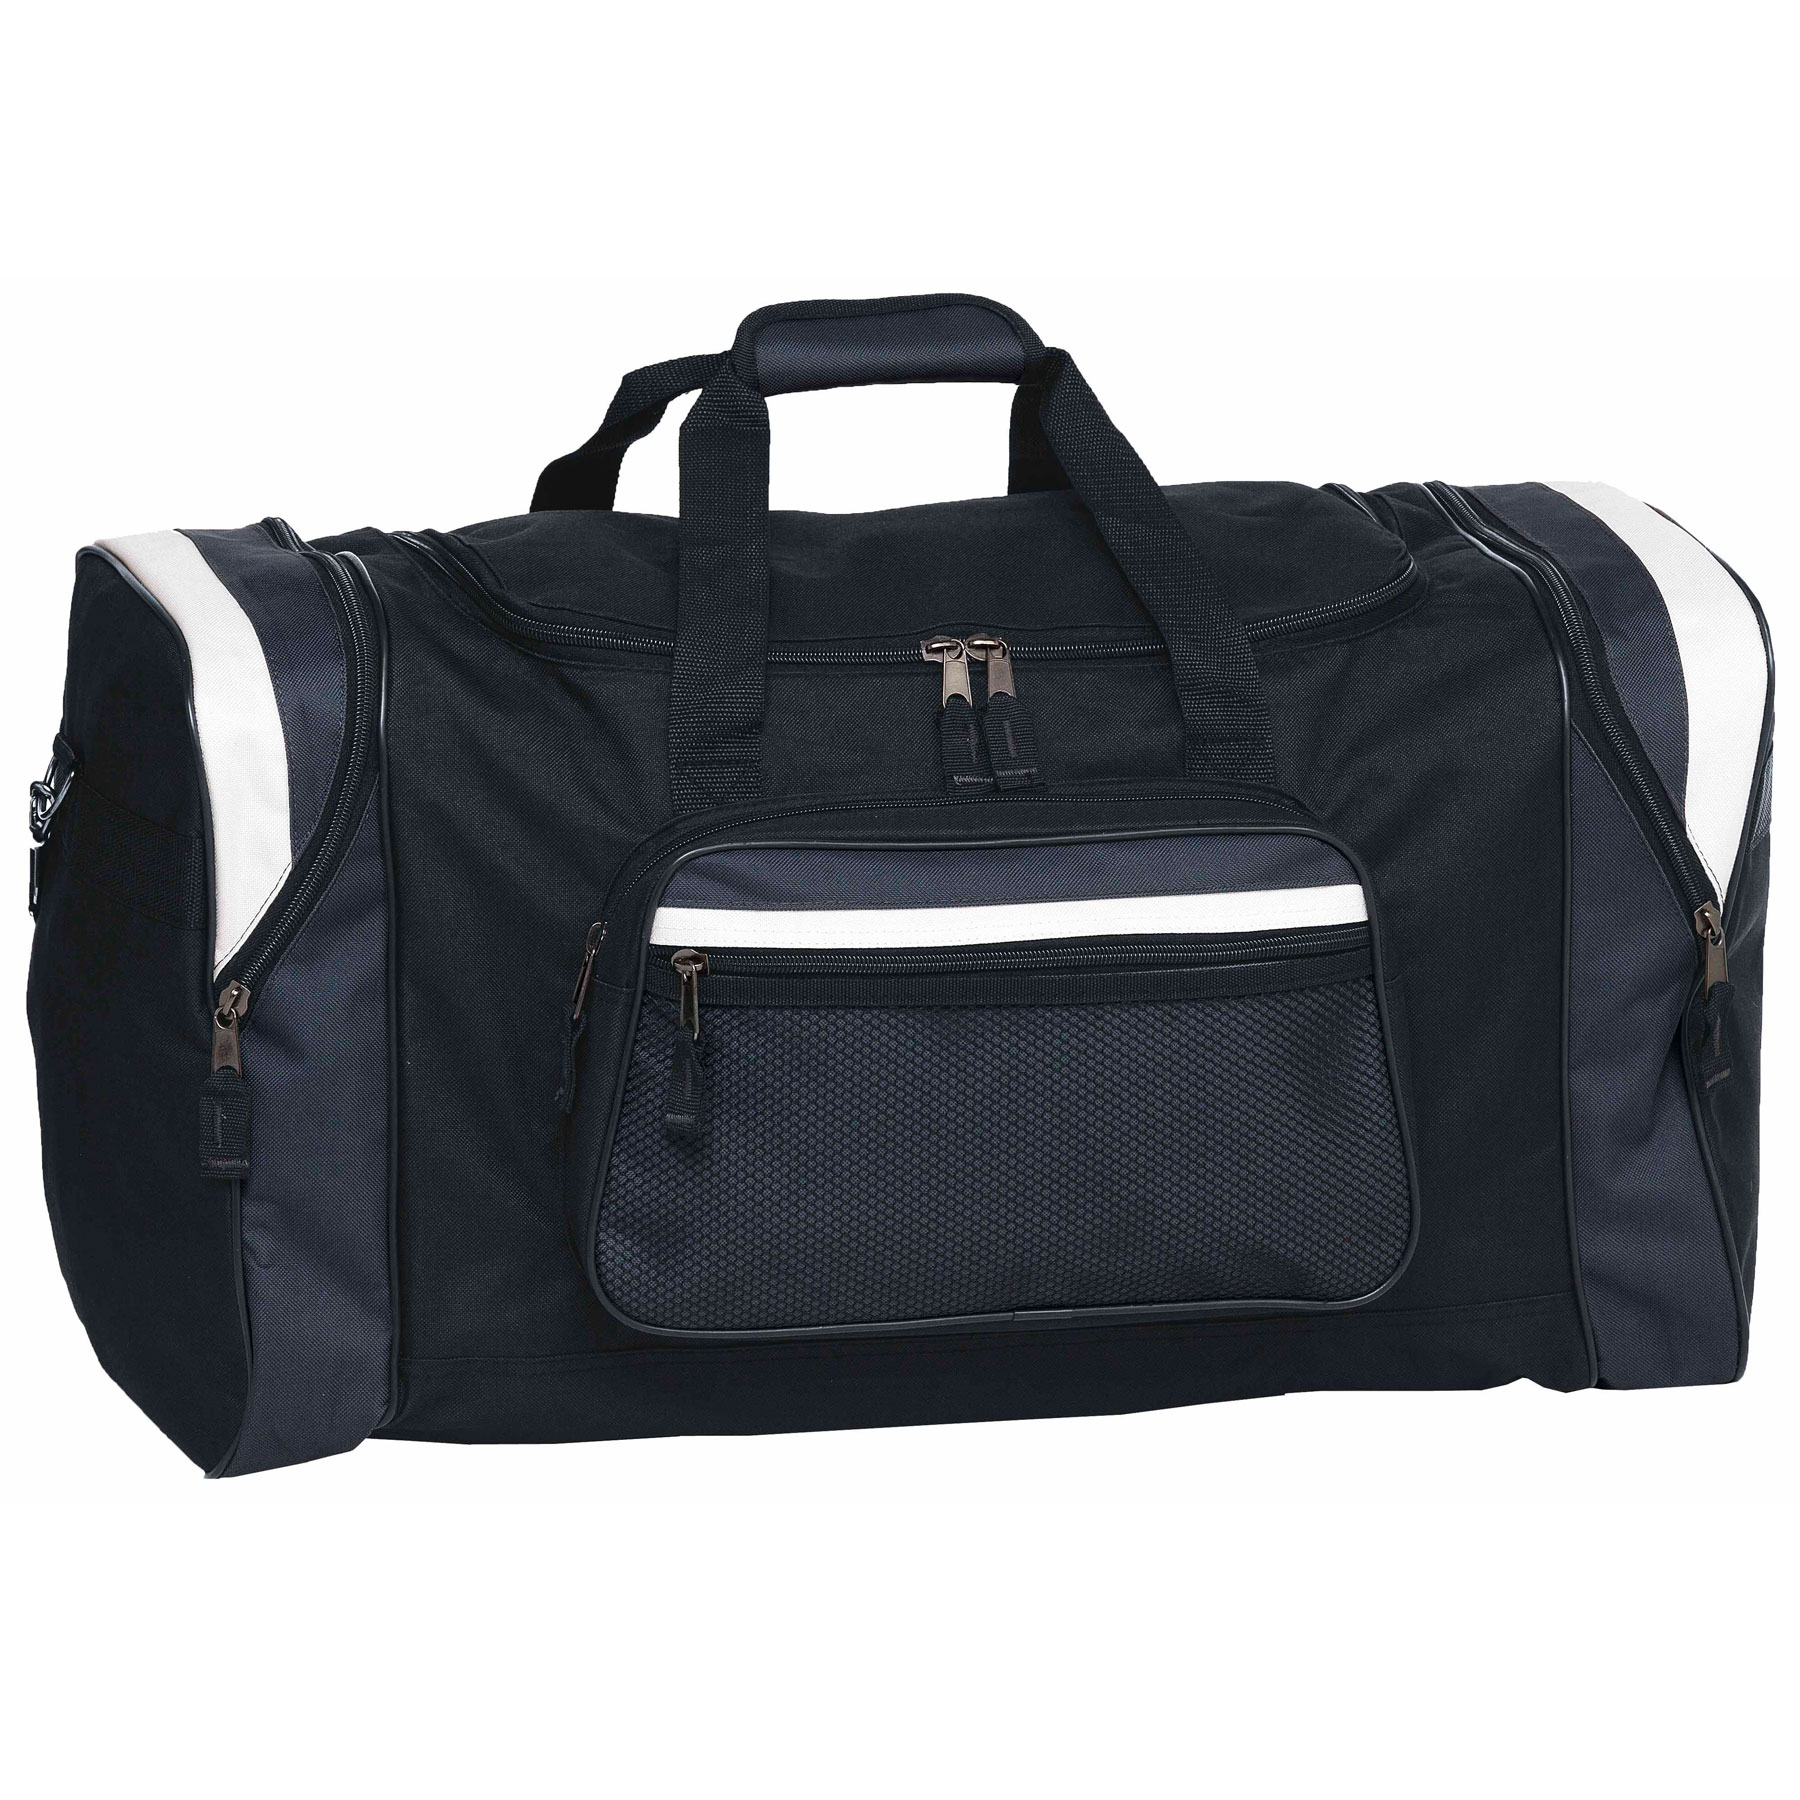 Contrast Gear Sports Bag | Gear For Life